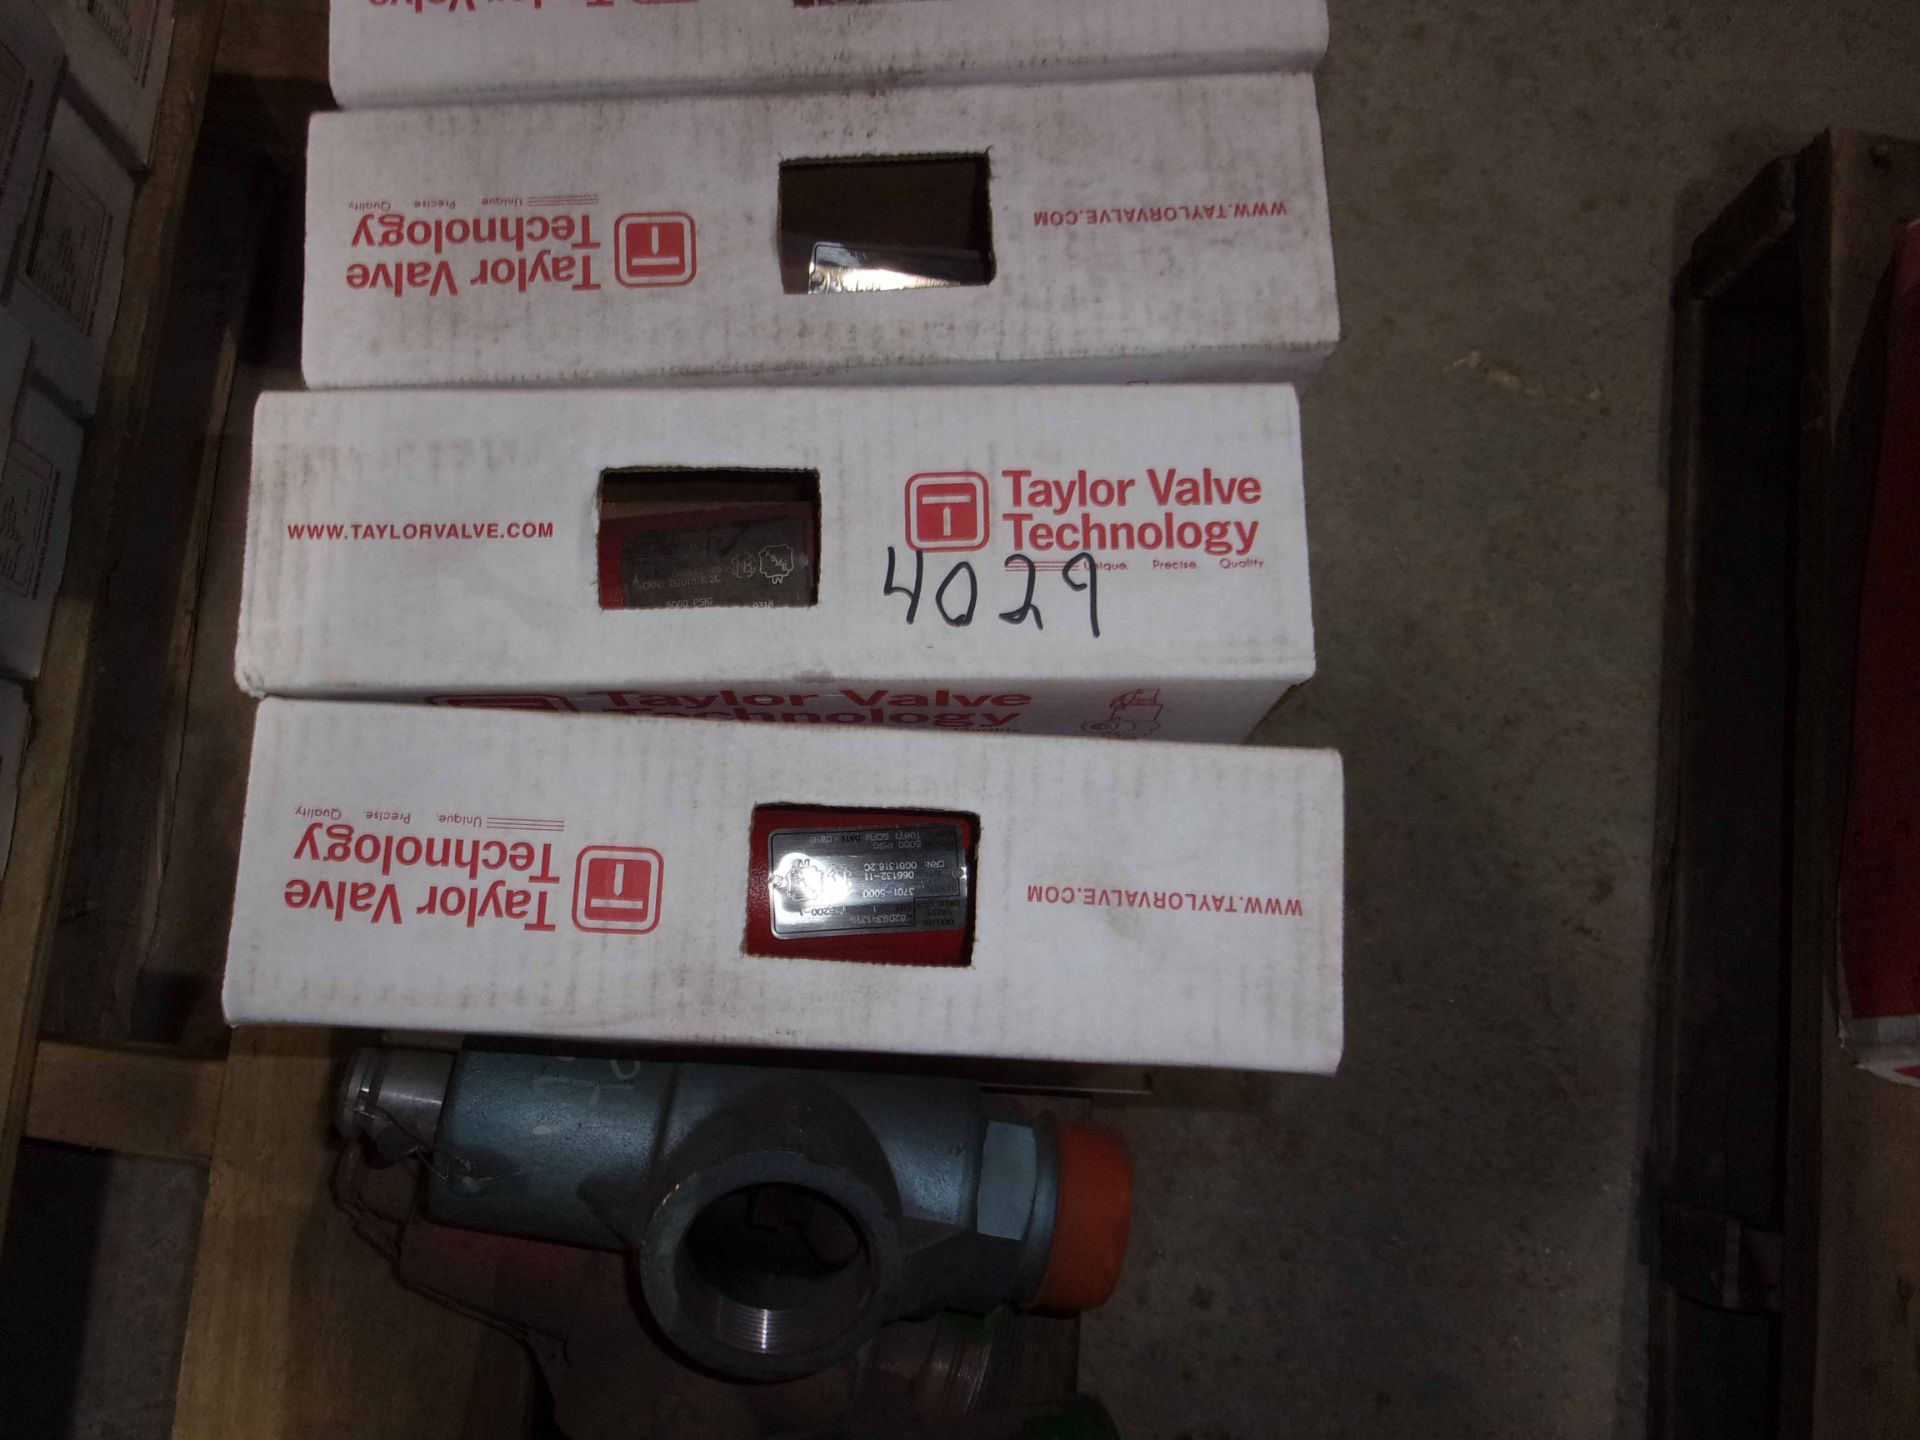 LOT CONSISTING OF: (APPROX. 15) VALVE RELIEF,SPRING OPERATED,1" X 1",MNPT X FNPT,D,PRESSURE RANGE: